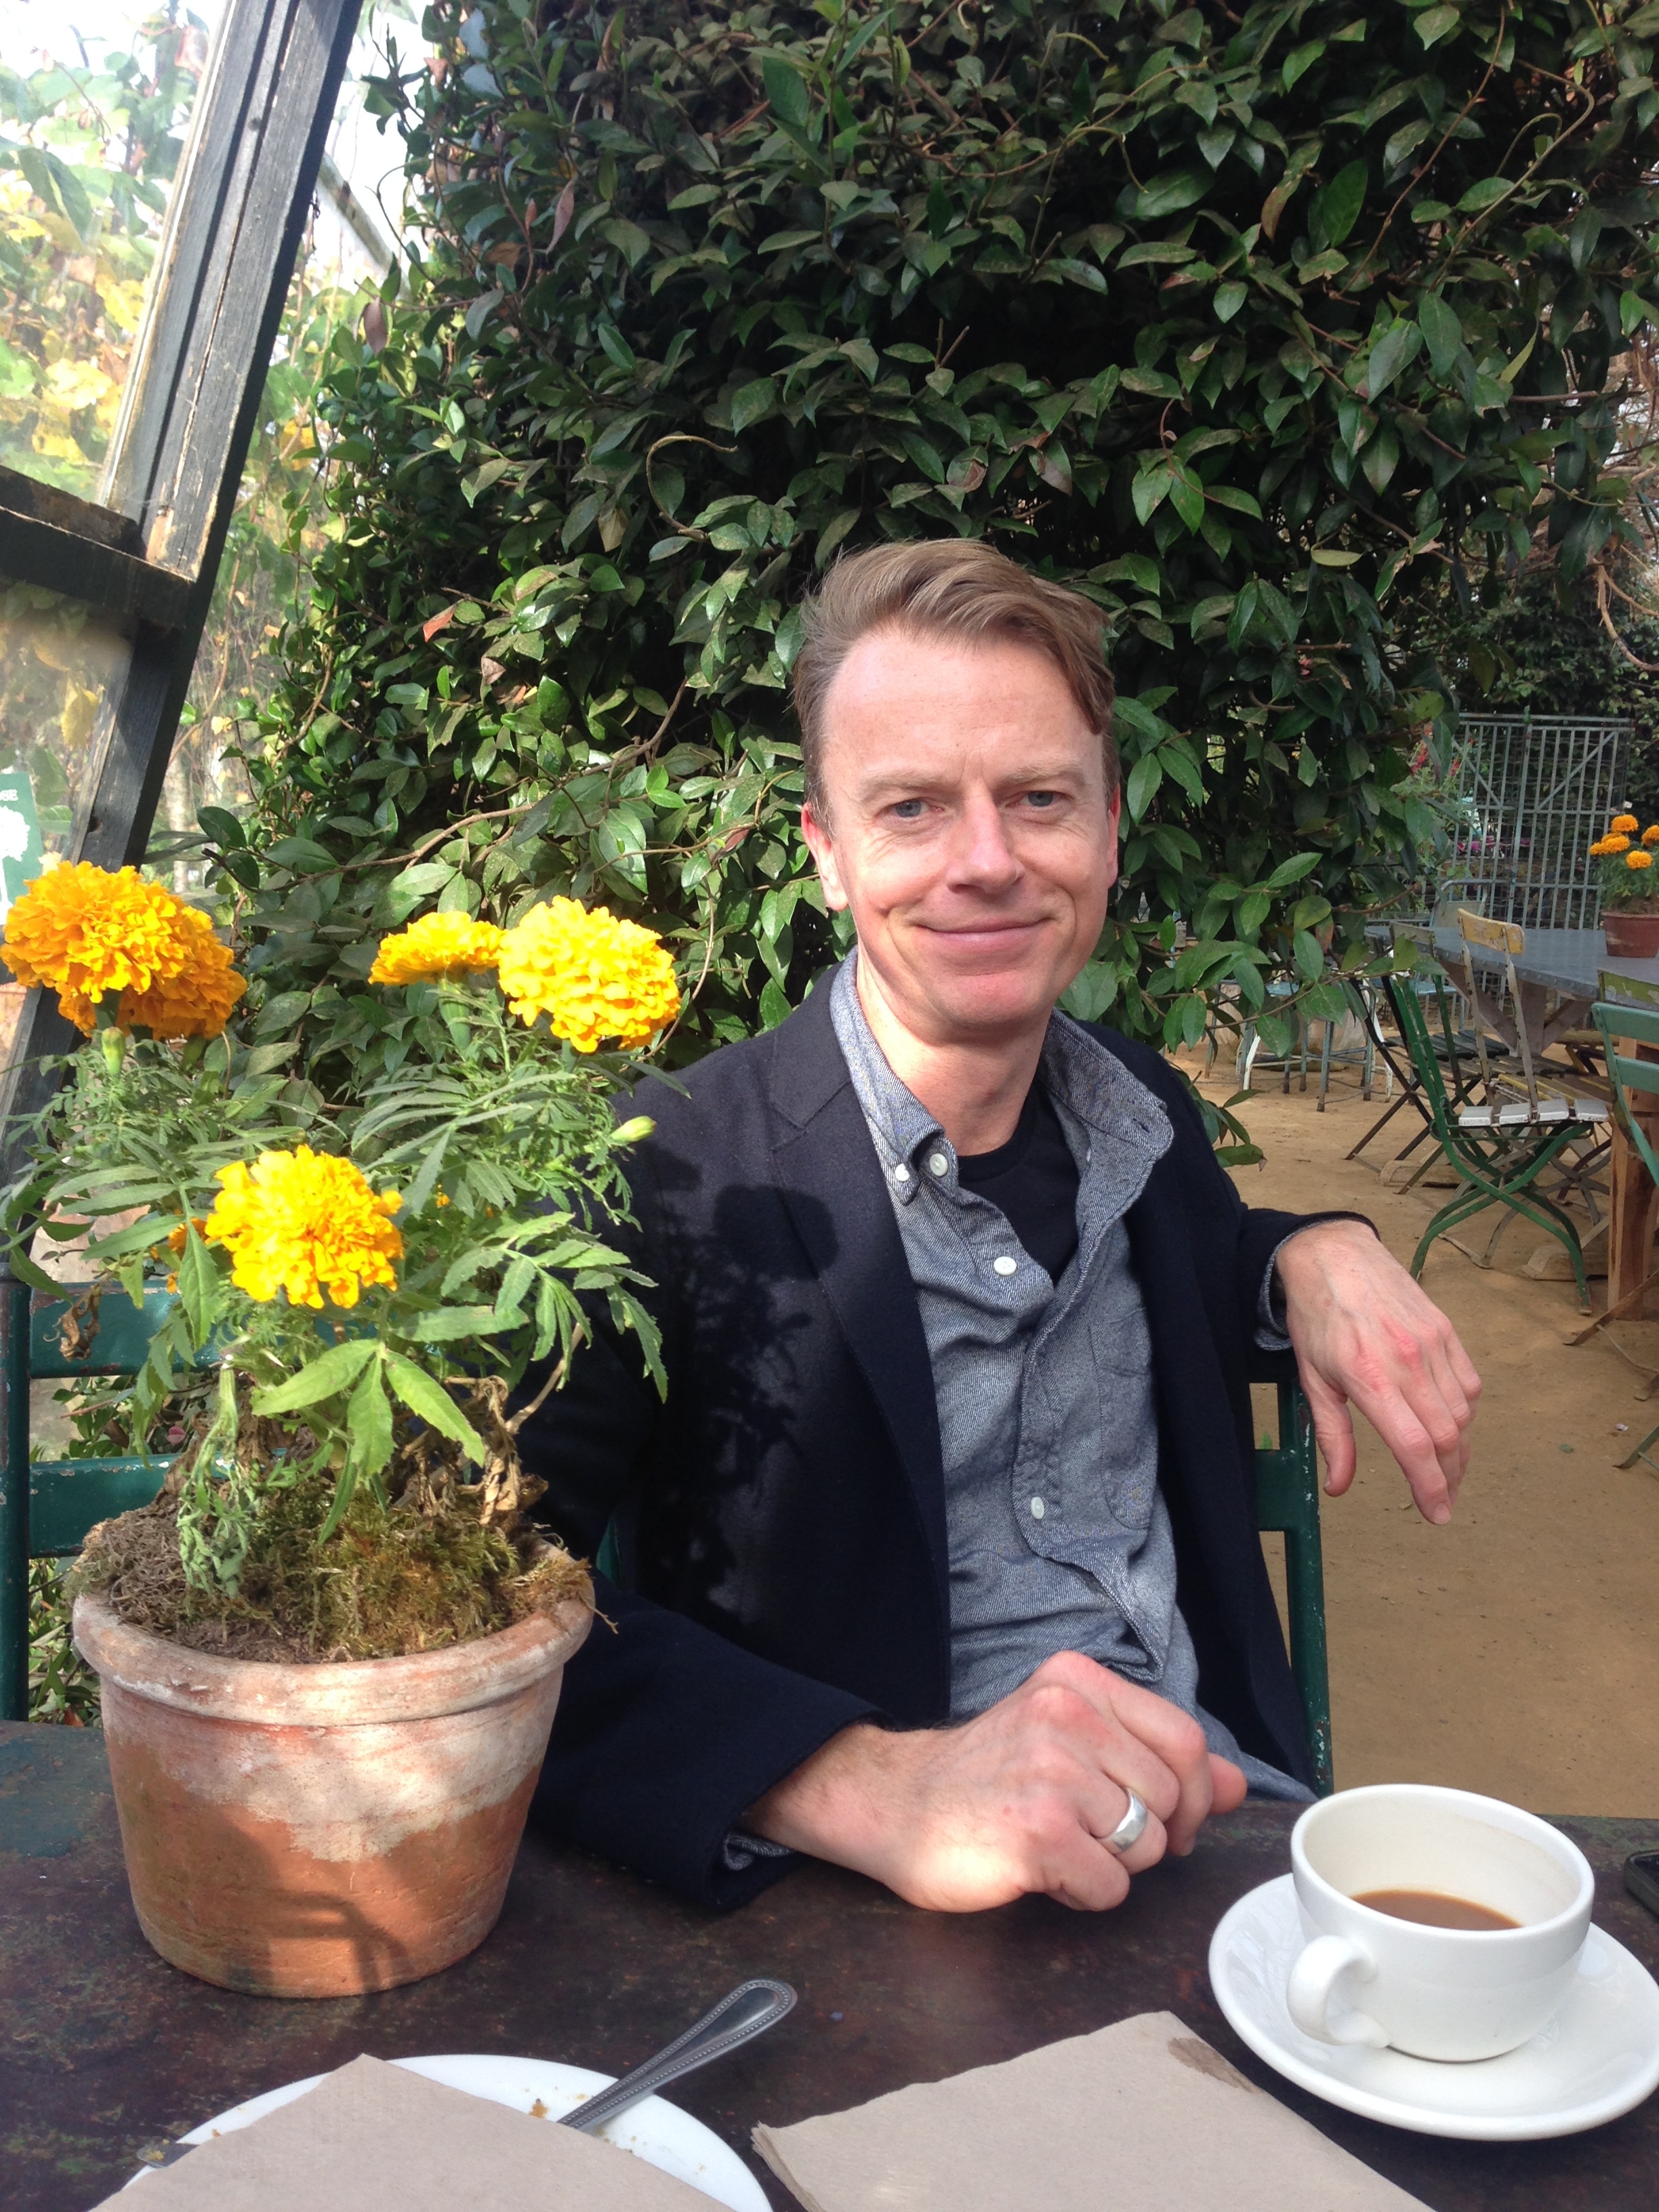  My friend Nick in the glasshouse where we were having coffee and cake.&nbsp; I am not a lover of marigolds but a terracotta pot of them on the table looked gorgeous 